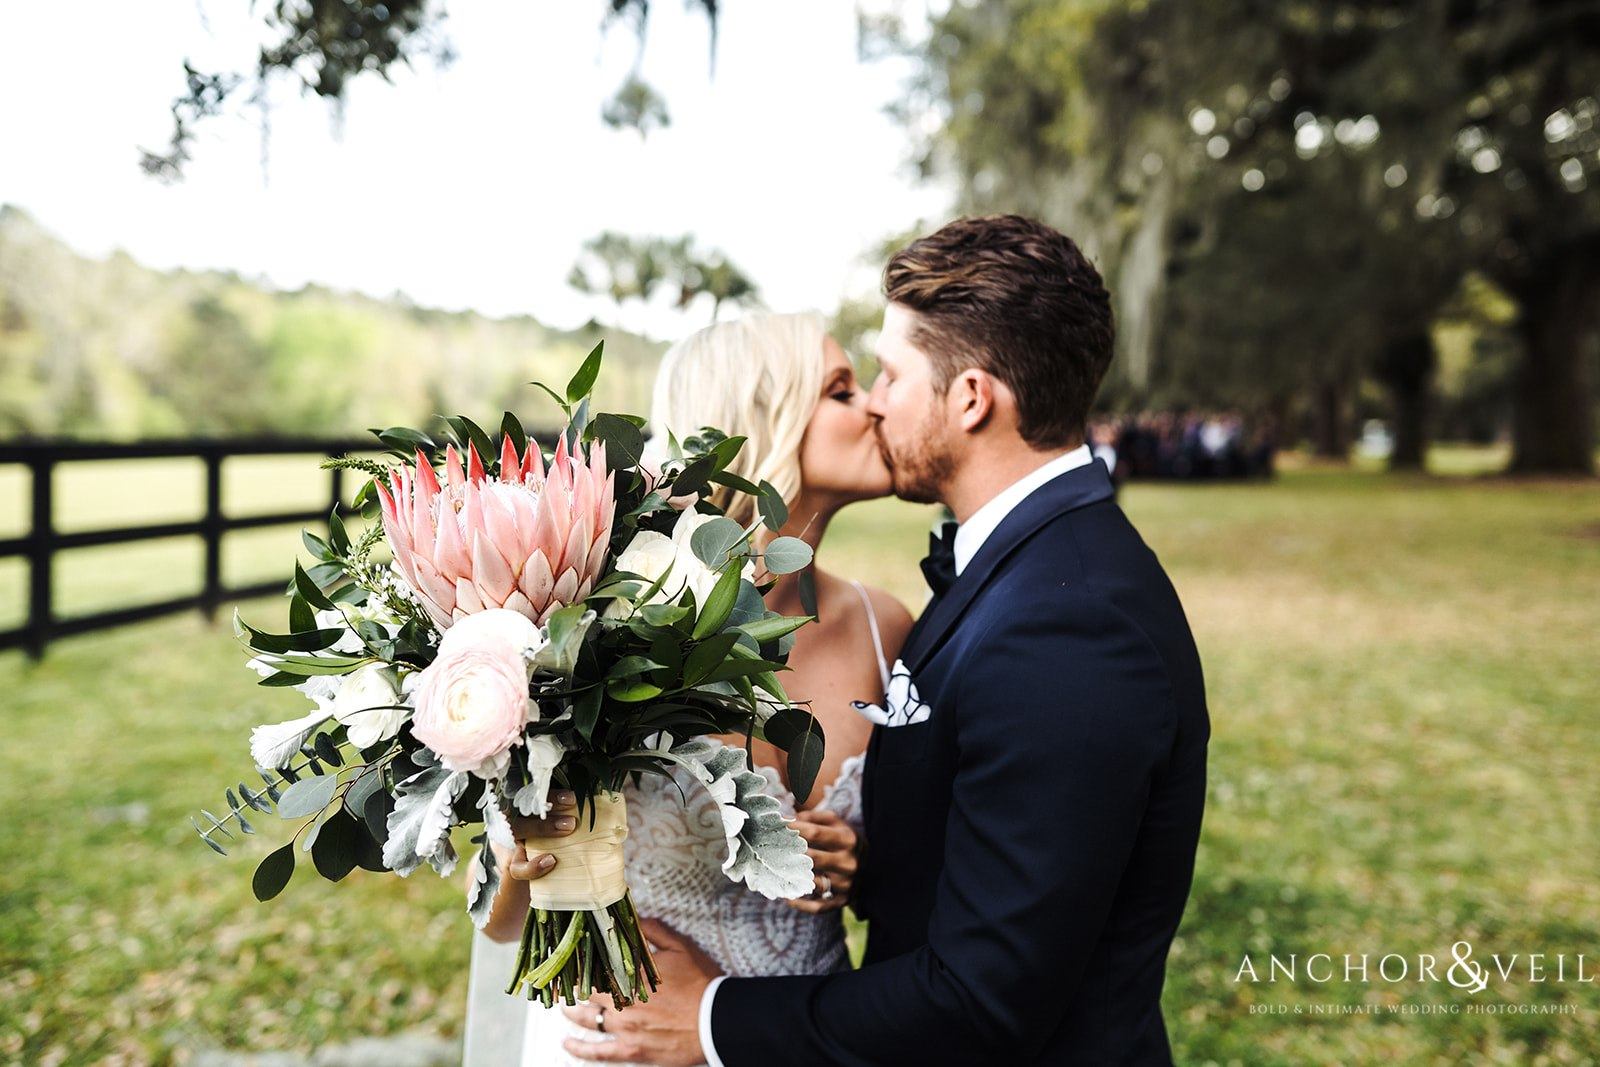 The brides's favorite flower, King Protea at the Boone Hall Plantation Wedding